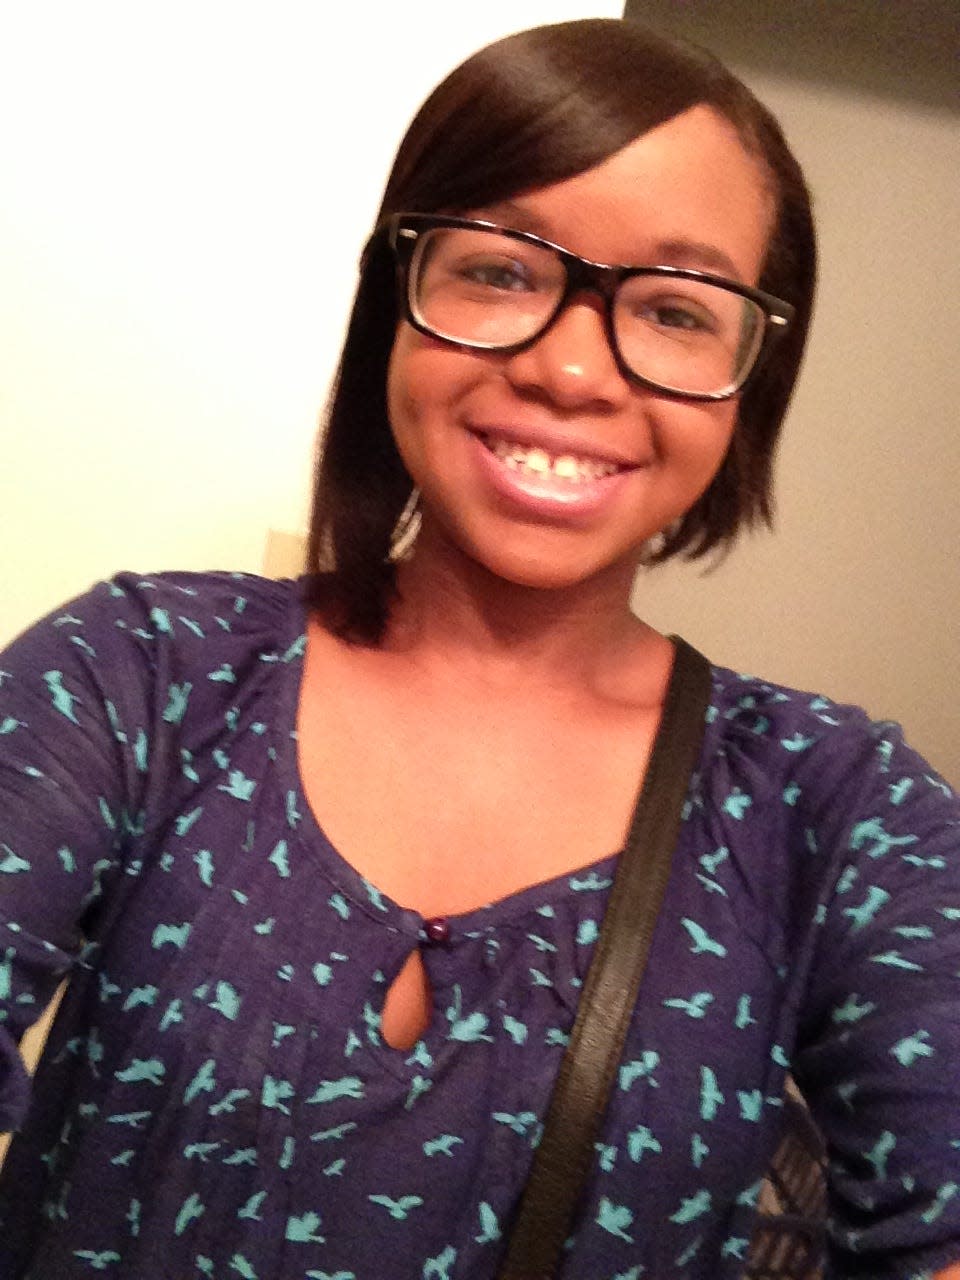 Taneia Surles in August, 2013, wearing glasses and looking at the camera